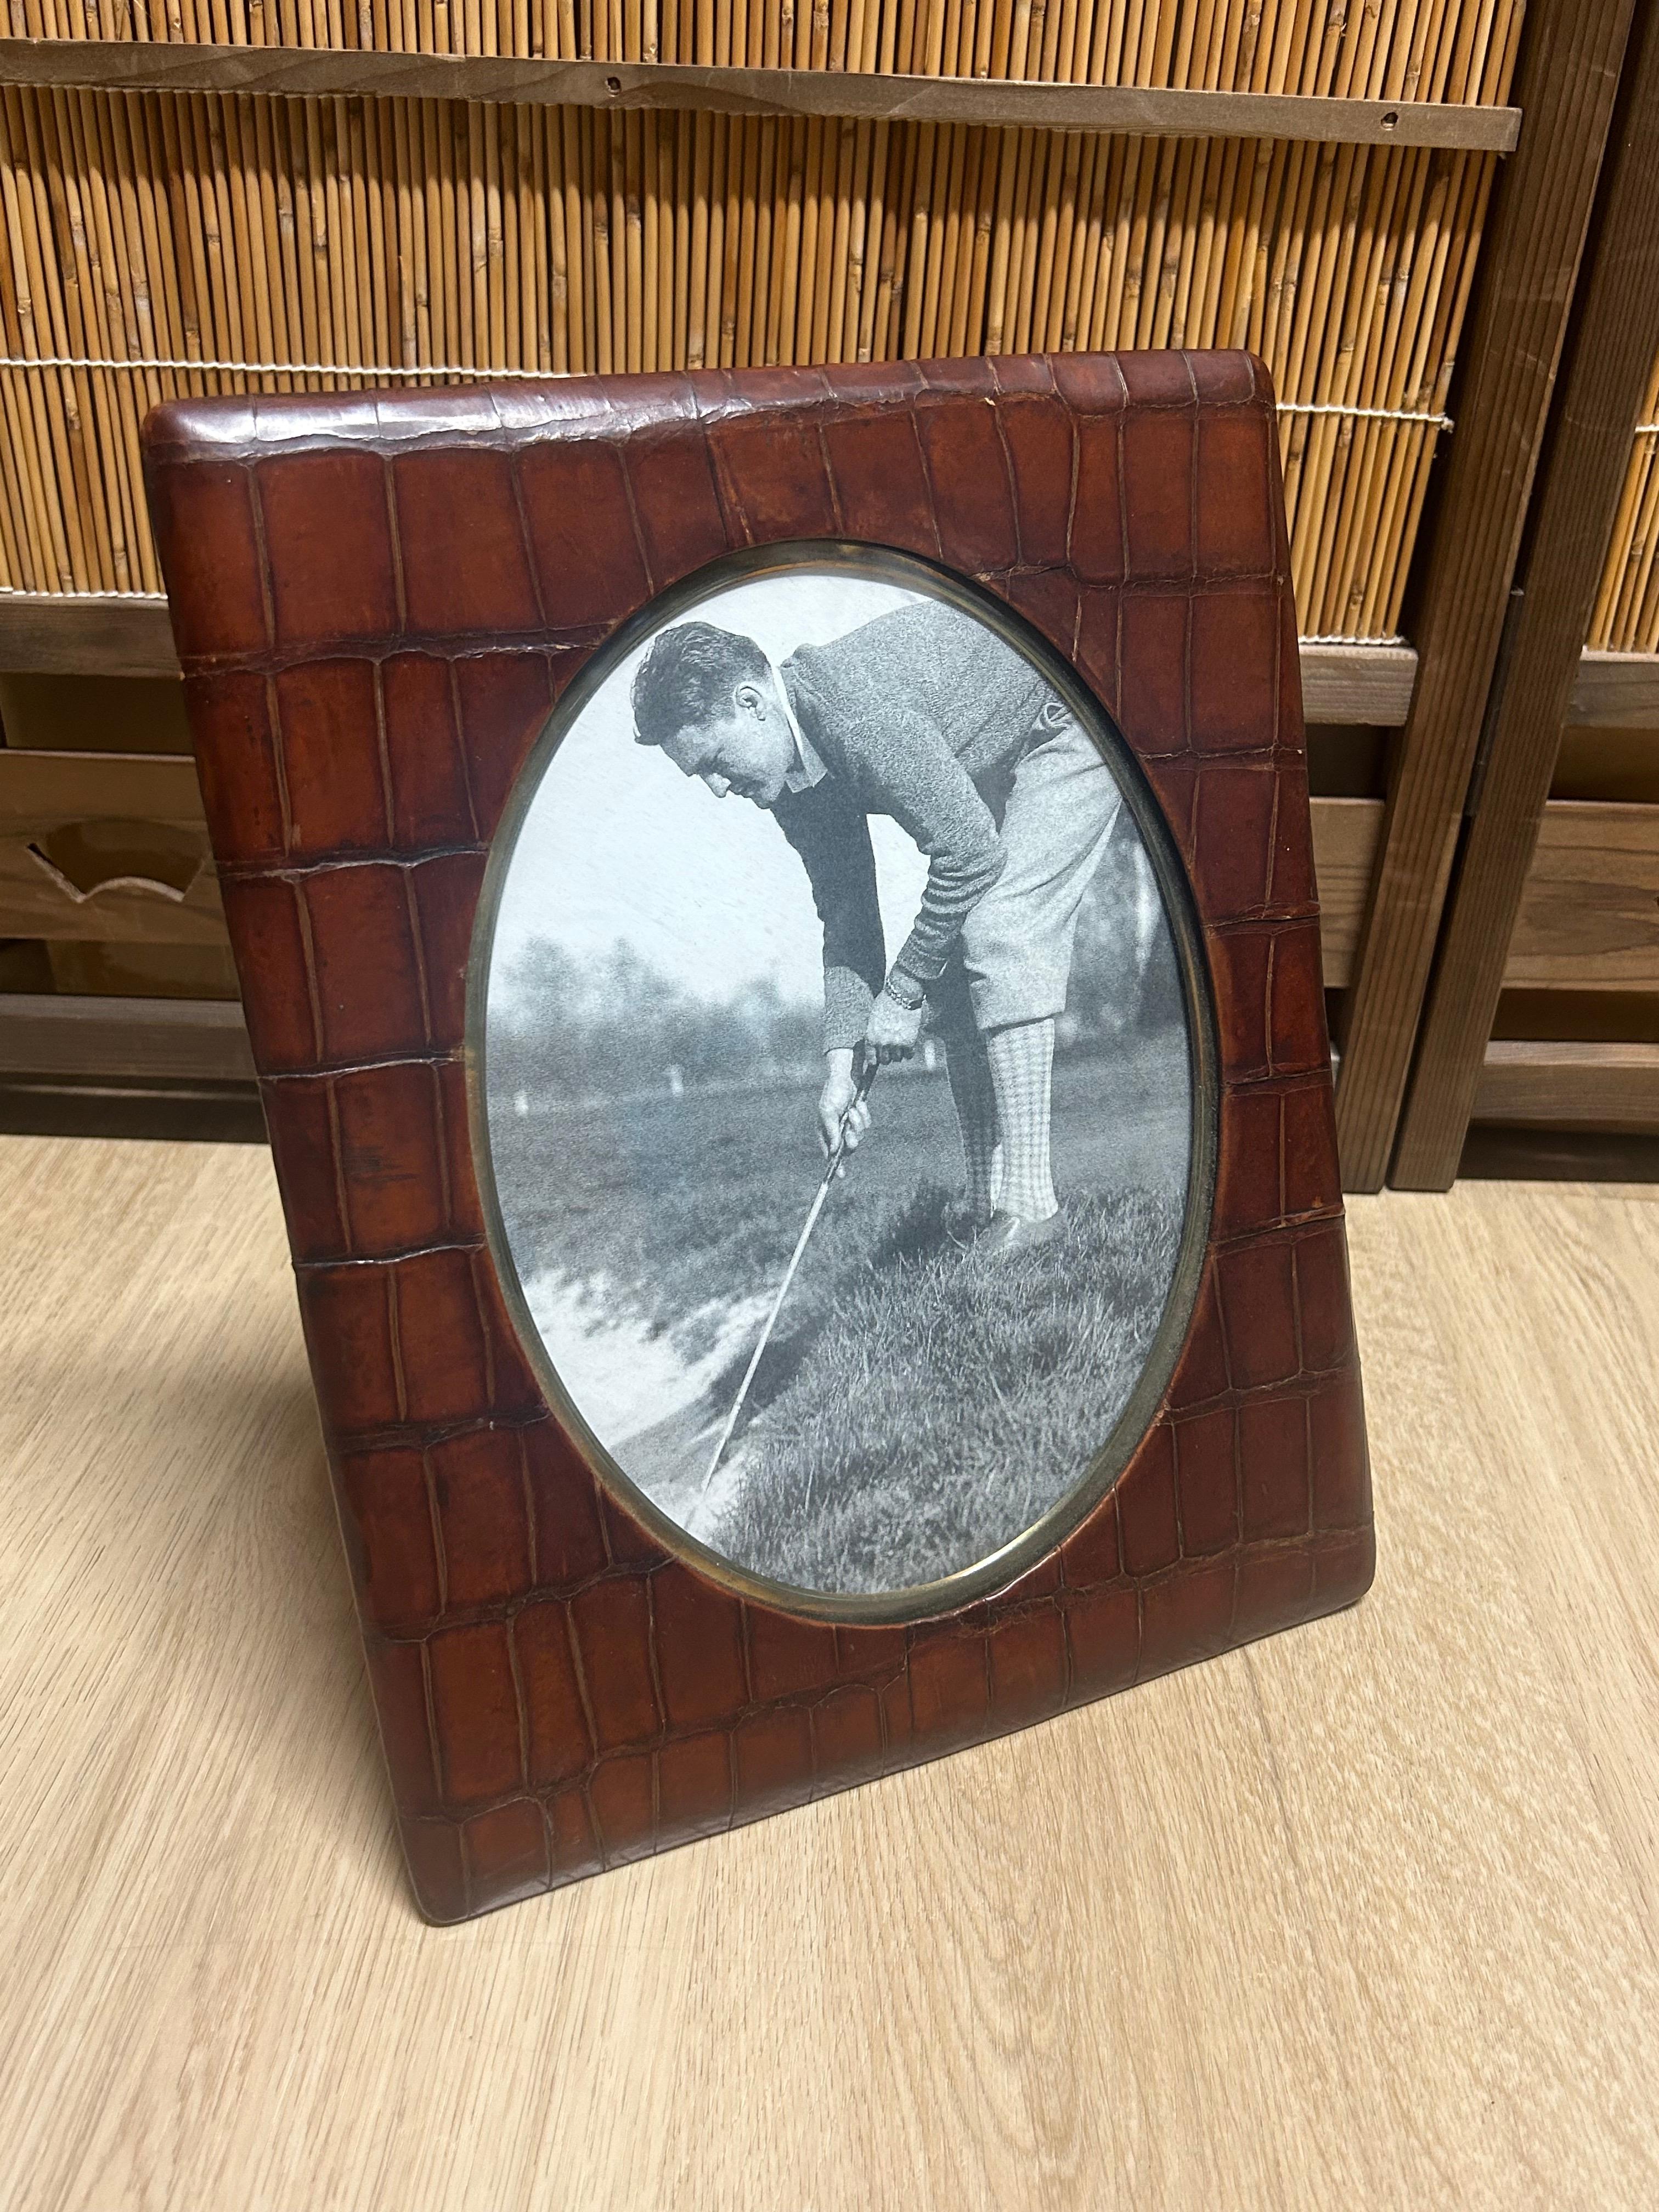 The front of the frame is covered in alligator leather and trimmed in brass along the circumference of the oval opening. The back is covered with oiled canvas and the inside lined with original golden fabric. The photo in it is a simple reproduction